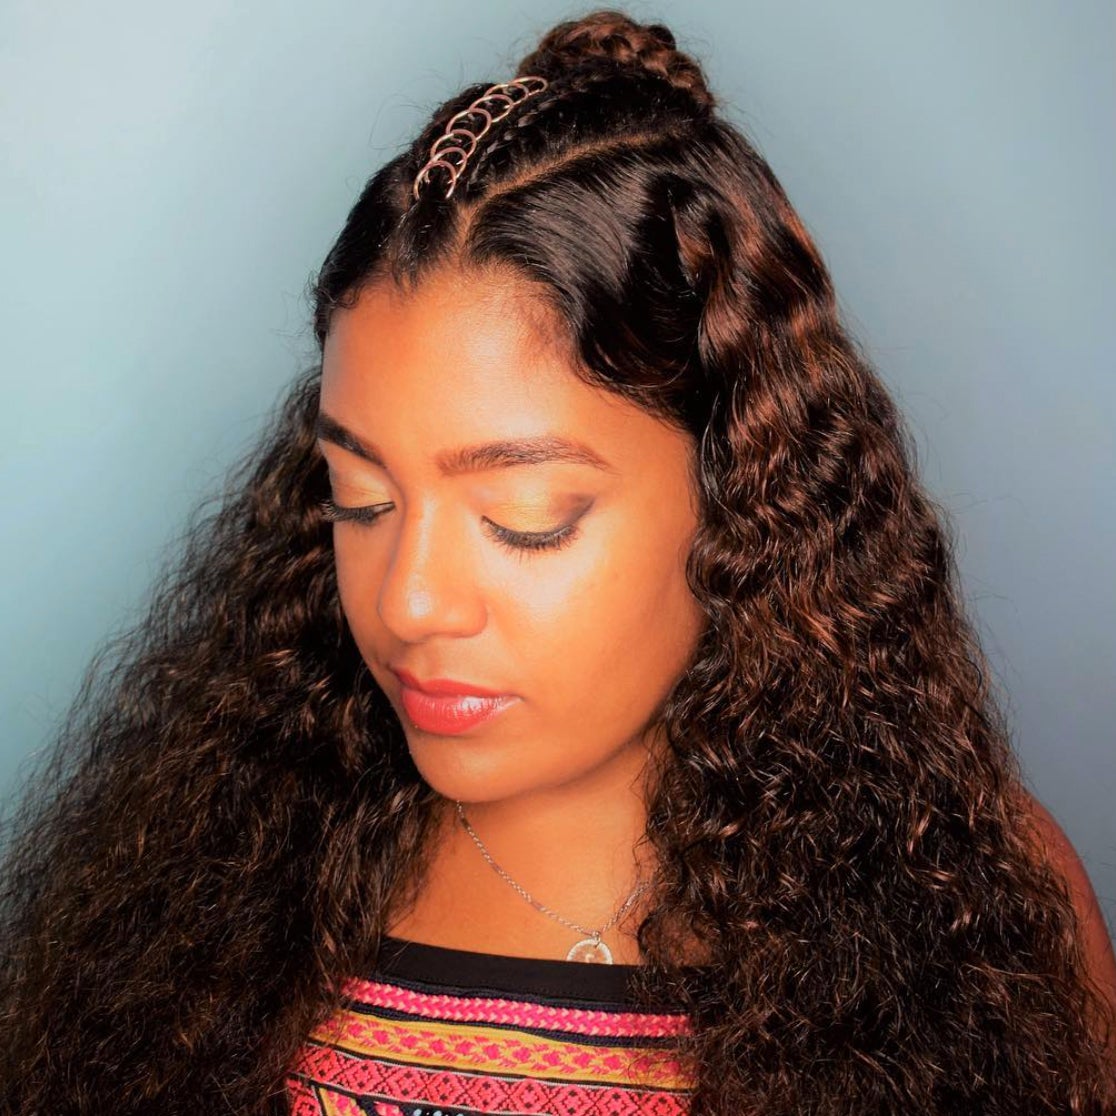 All Of The Hair Rings Inspo You Need For Festival Season